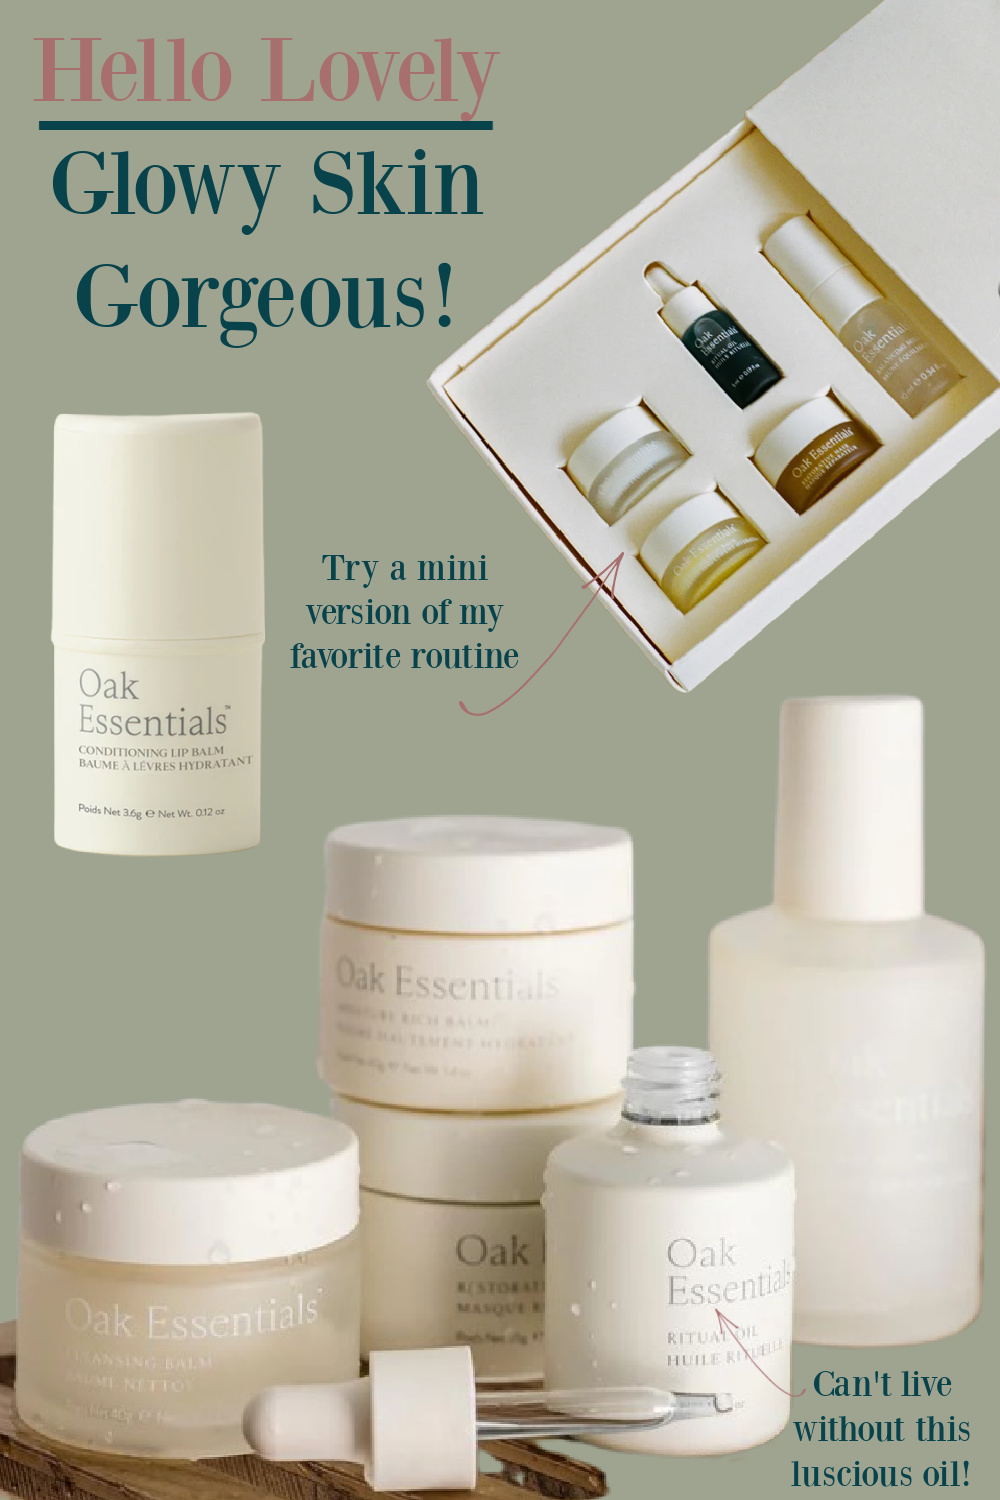 Hello Lovely Glowy Skin Gorgeous - Favorite skin care products from Oak Essentials (Jenni Kayne). #over50skincare #oakessentials